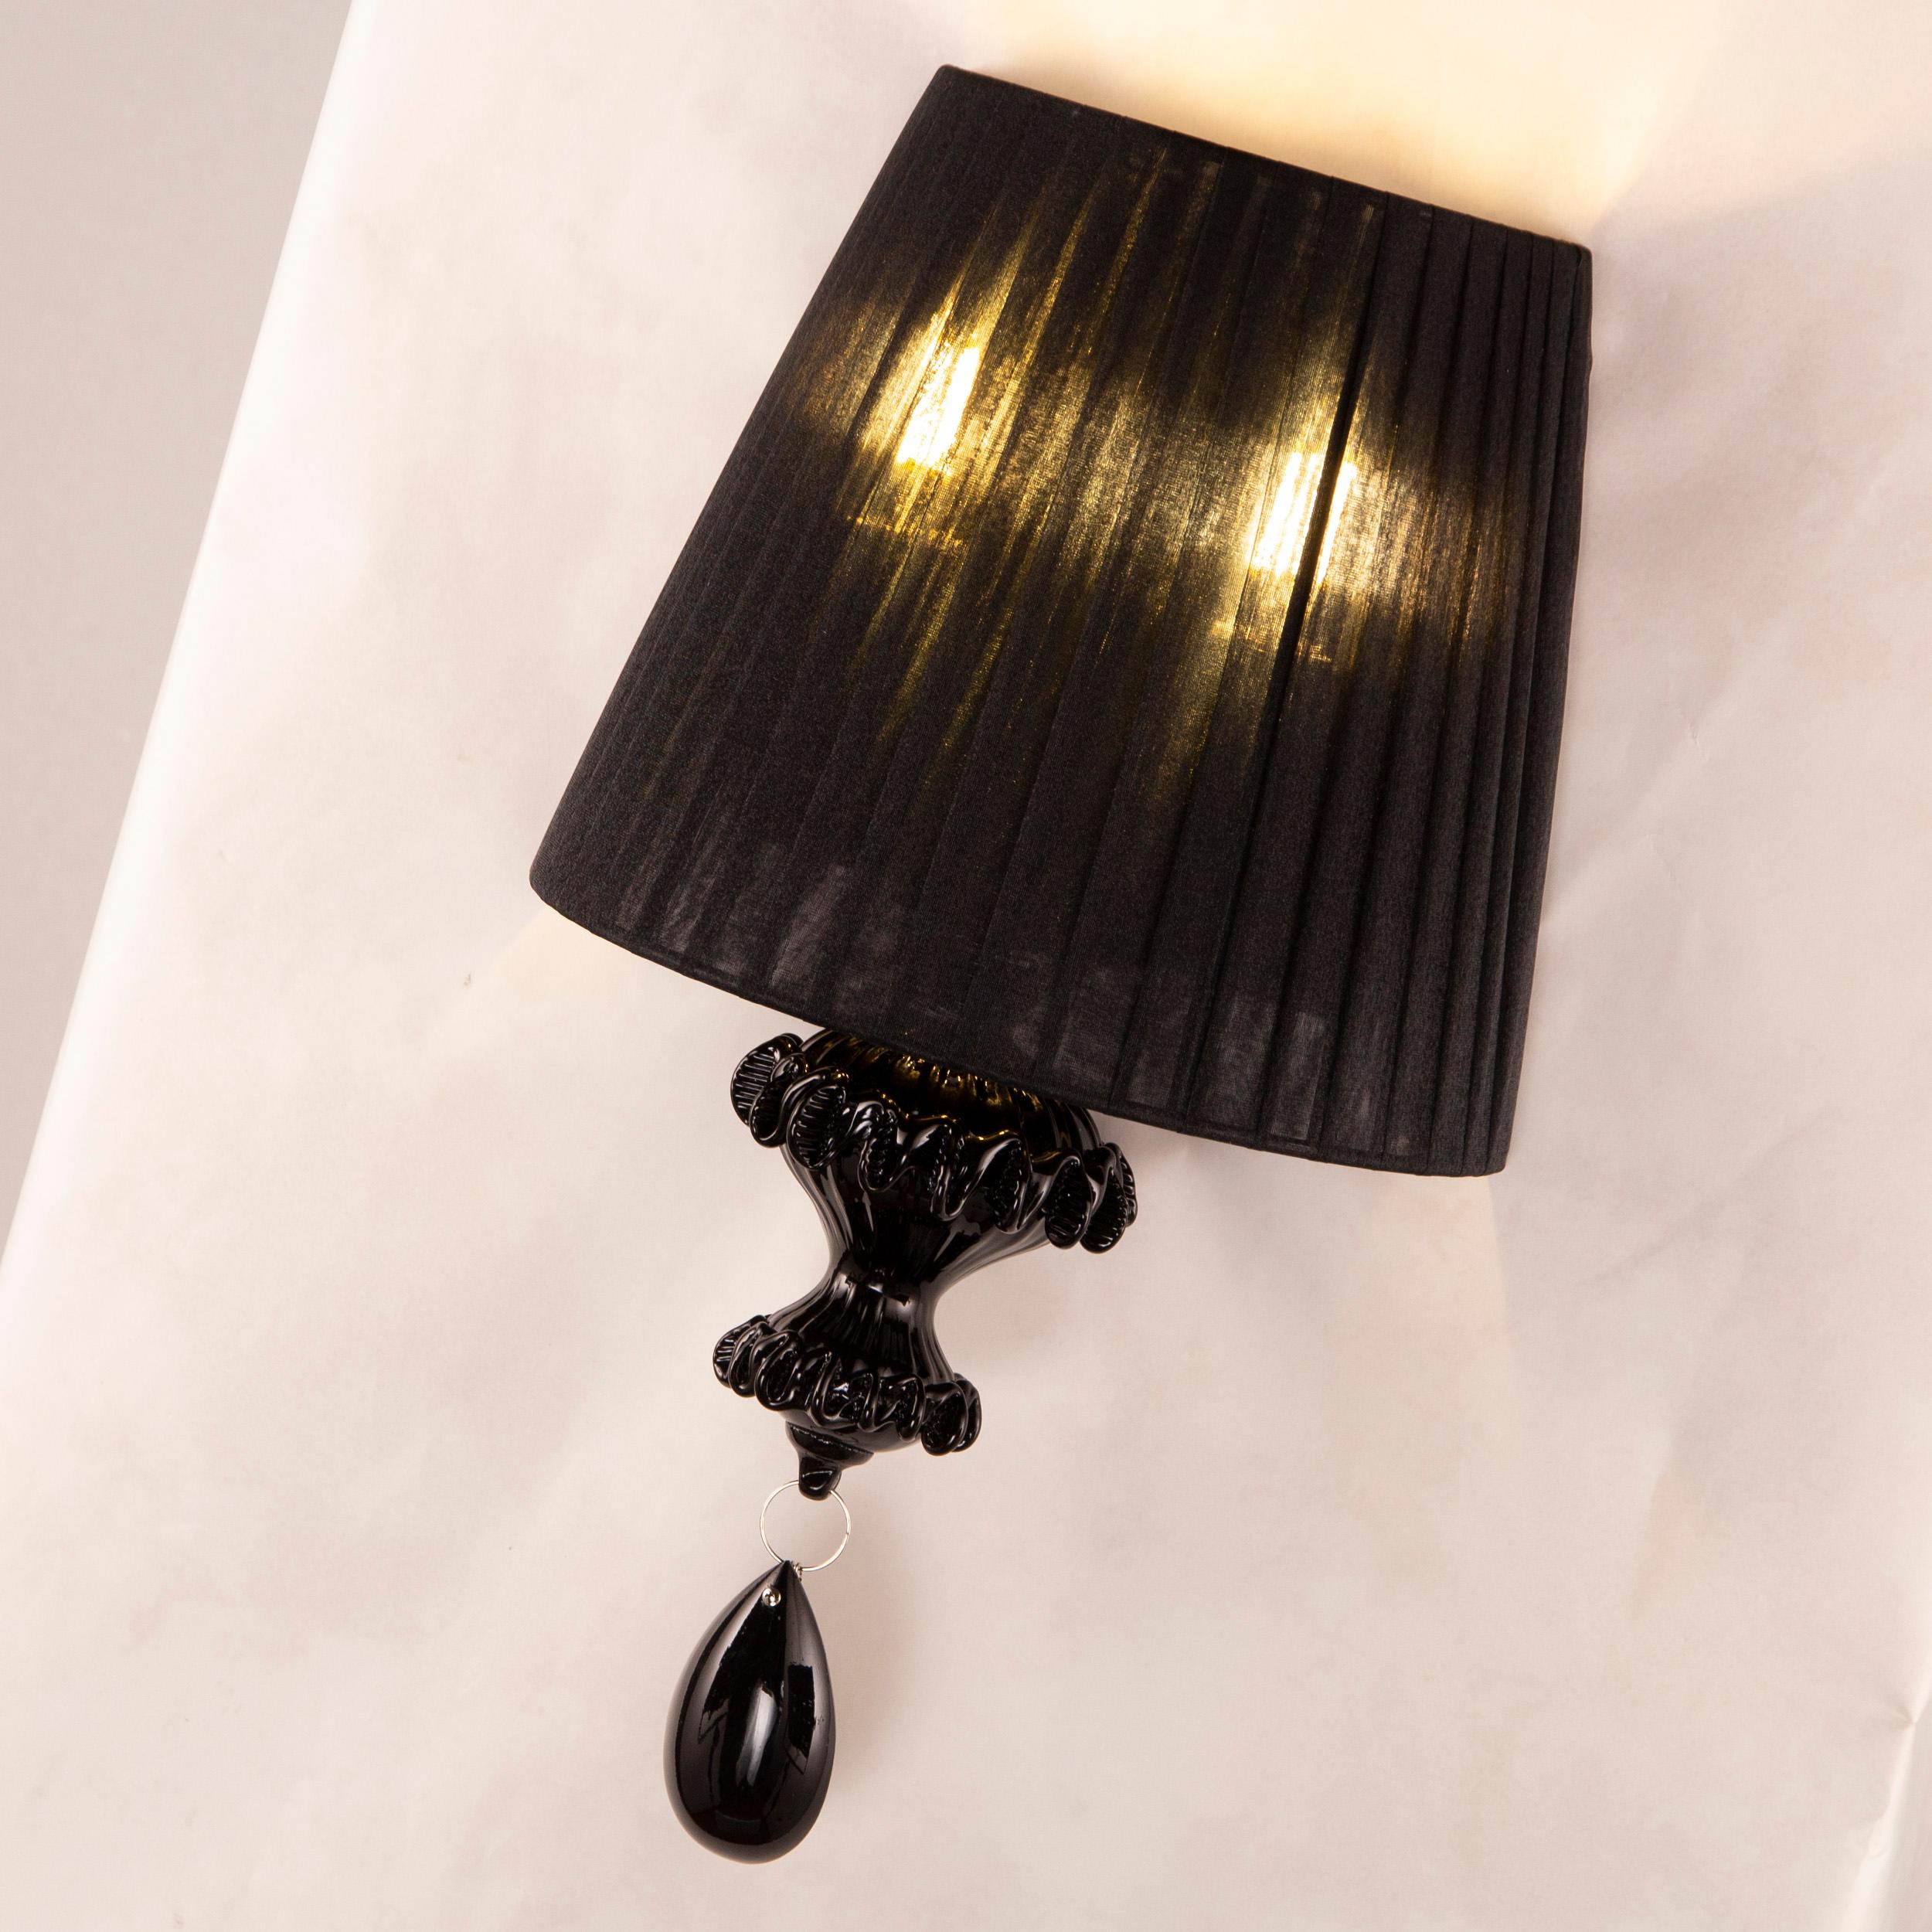 Elegant sconce 1 arm in black Murano glass with black plissé lampshade Montecristo by Multiforme

A collection that ideally recalls the splendour of the past, the sumptuous ballrooms of ancient Venice. A combination of craftsmanship skilfully